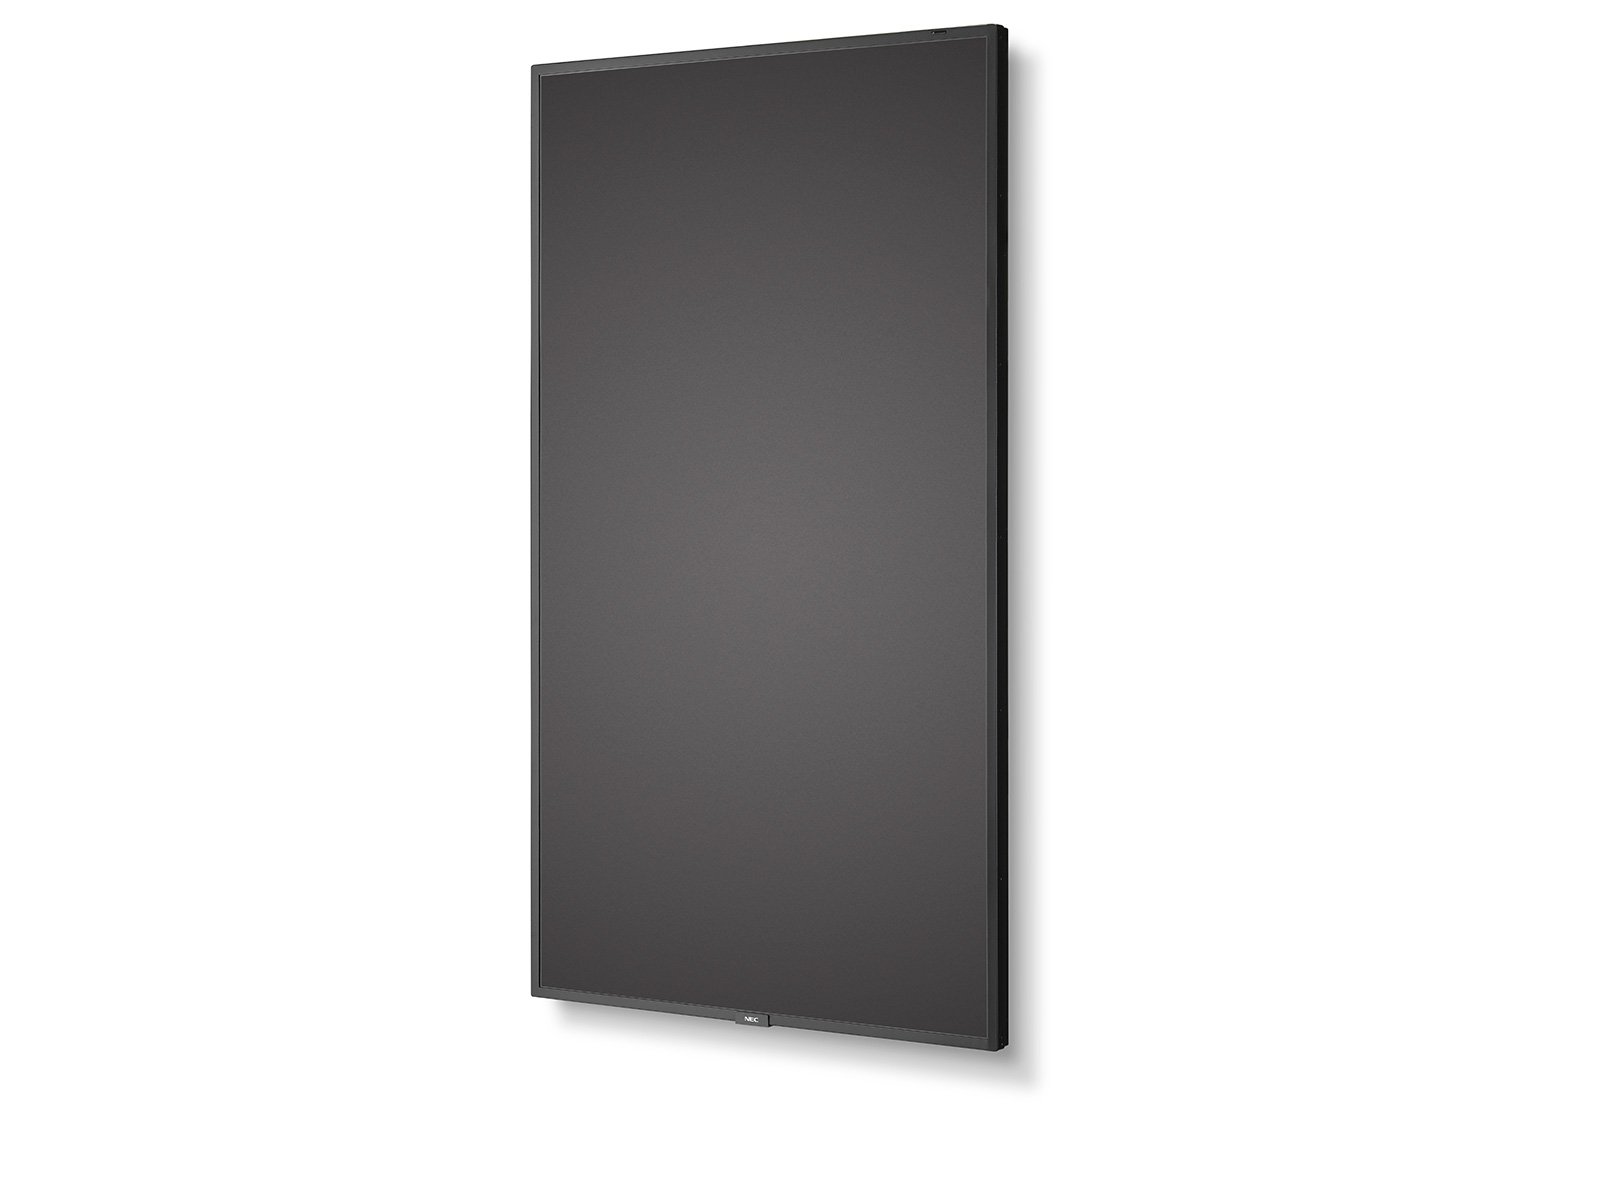 NEC MultiSync ME431 - 43 Inch - 400 cd/m² - Ultra-HD - 3840x2160 Pixel - 18/7 - Message Essential Large Format Display